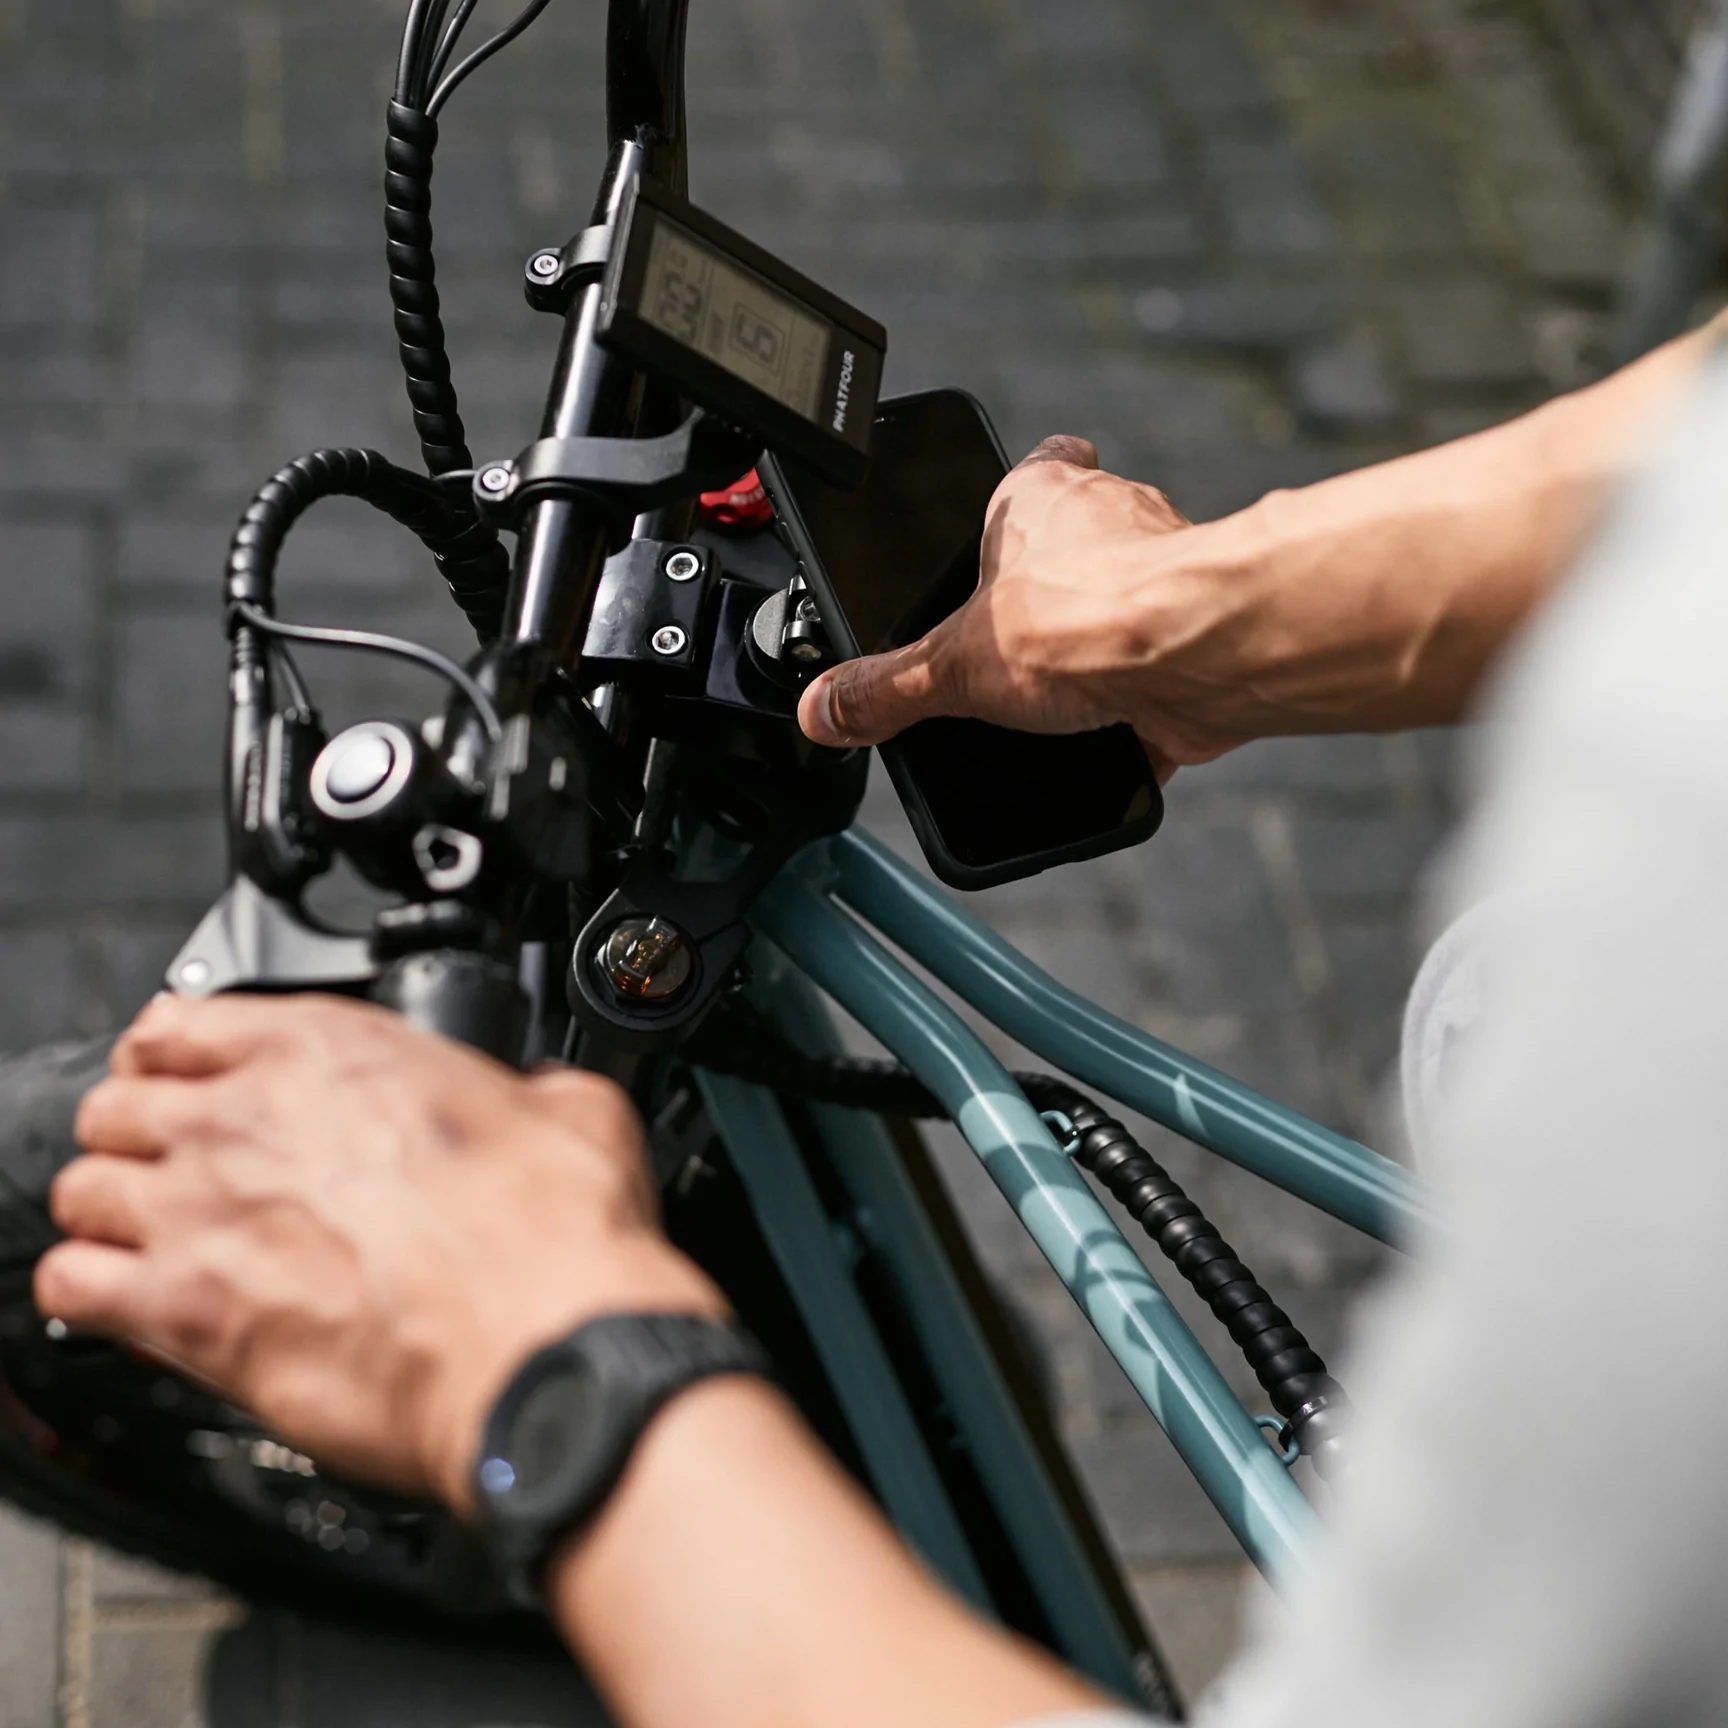 SP Connect smartphone houder voor alle type E-Rides